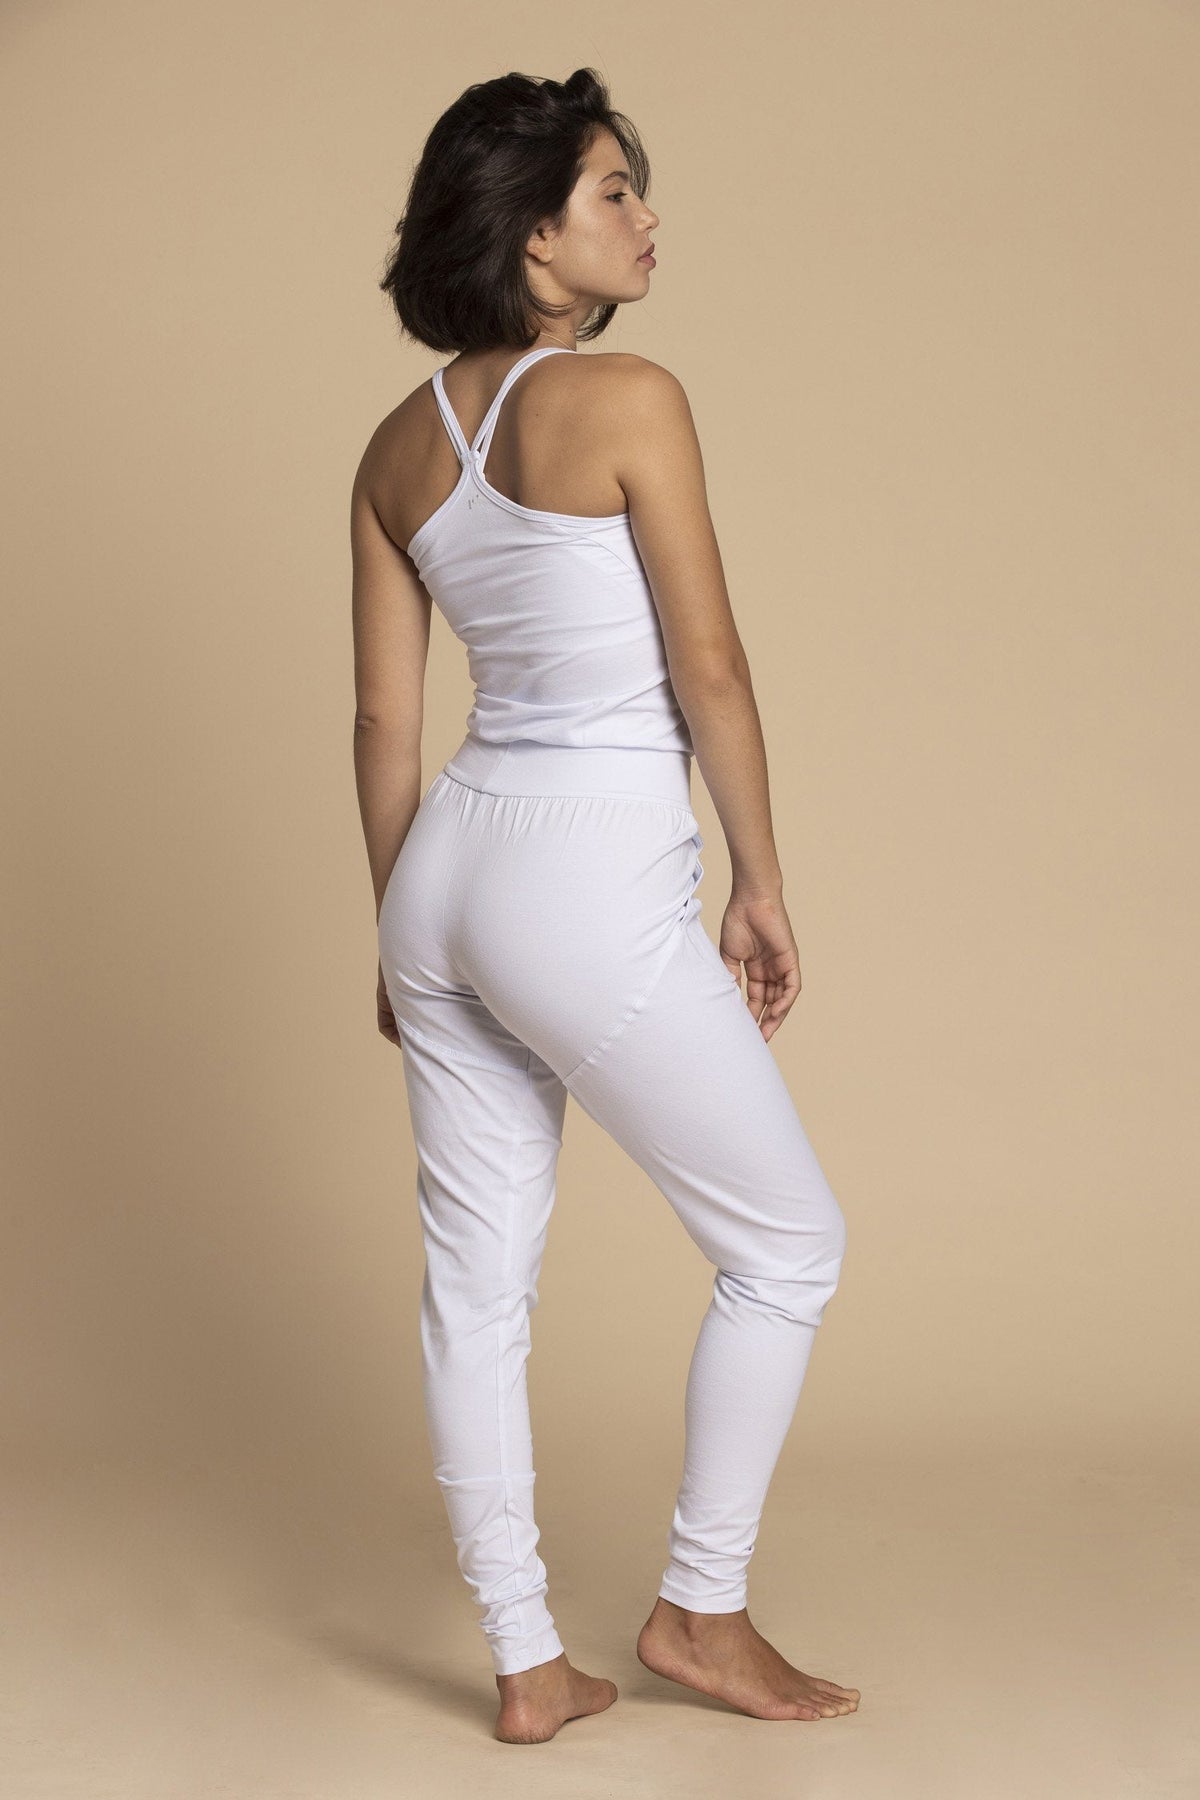 Pure While Long Yoga Jumpsuit womens clothing Ripple Yoga Wear 